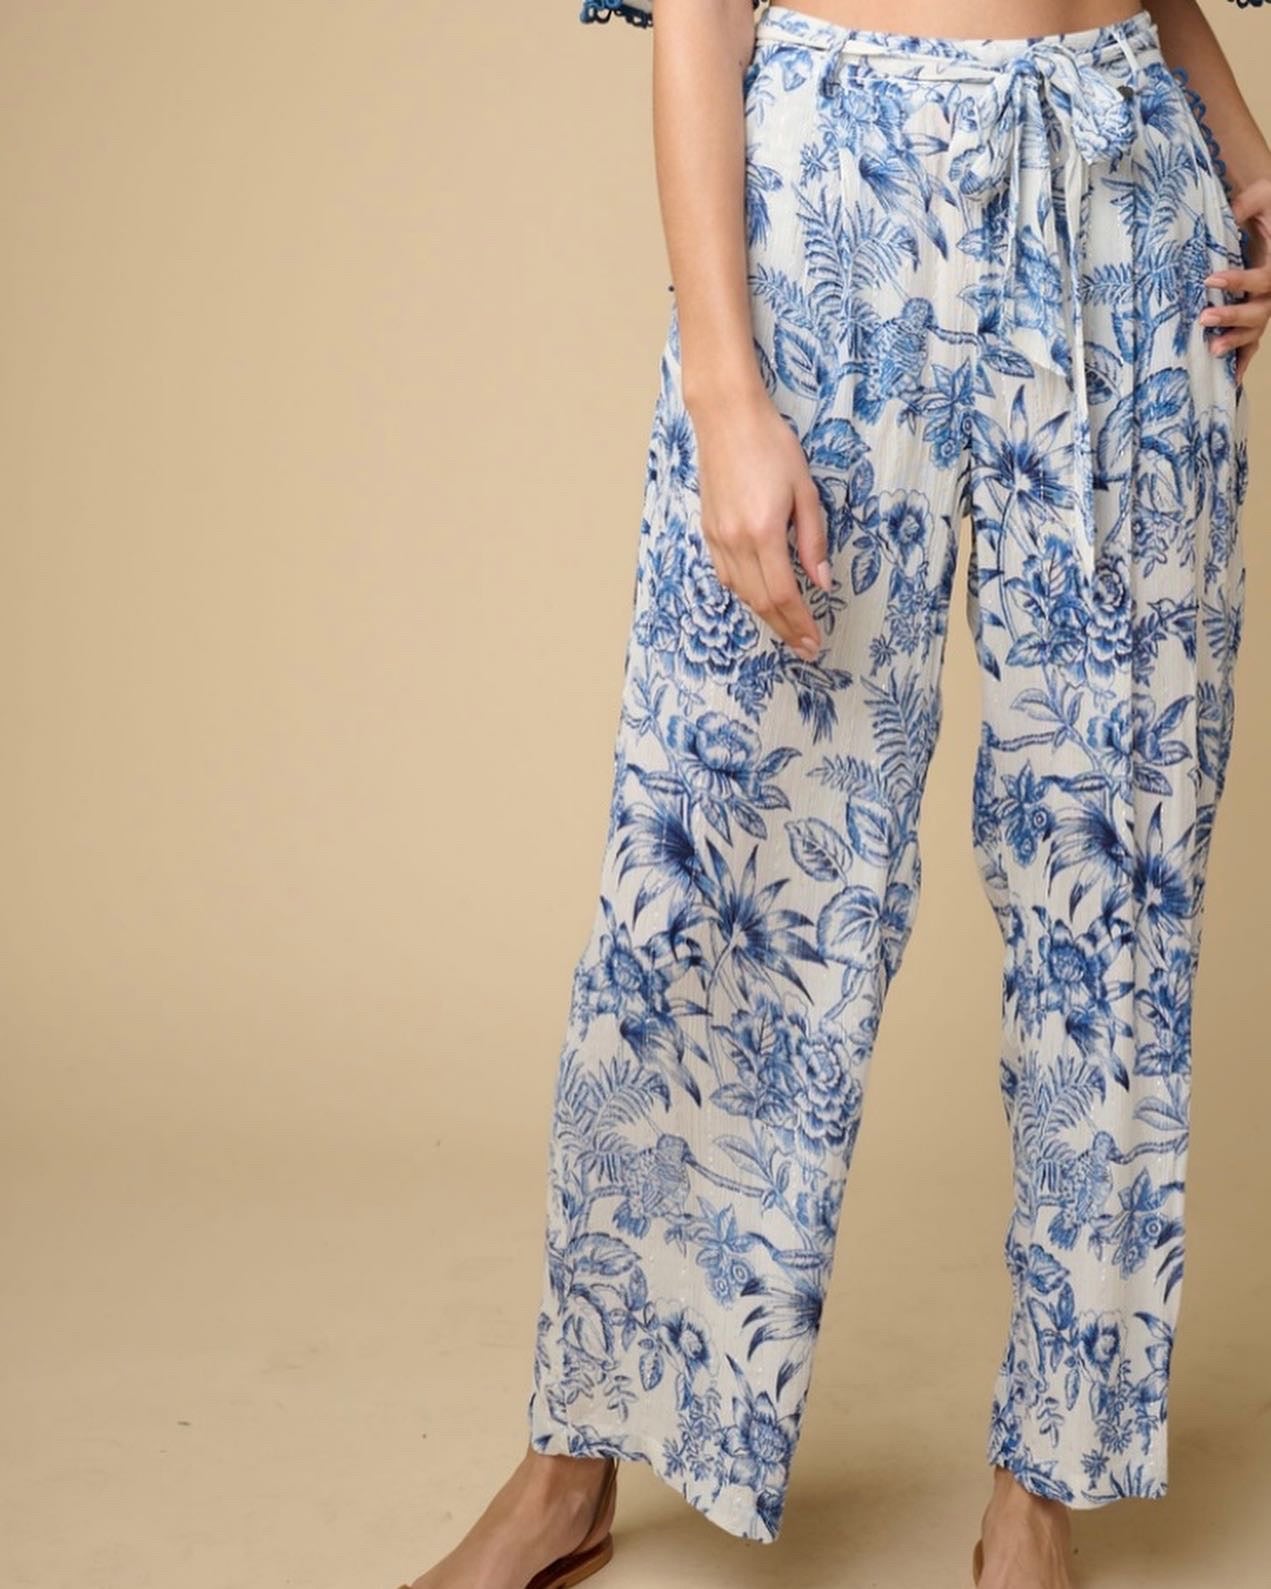 Lacie white and blue printed pants